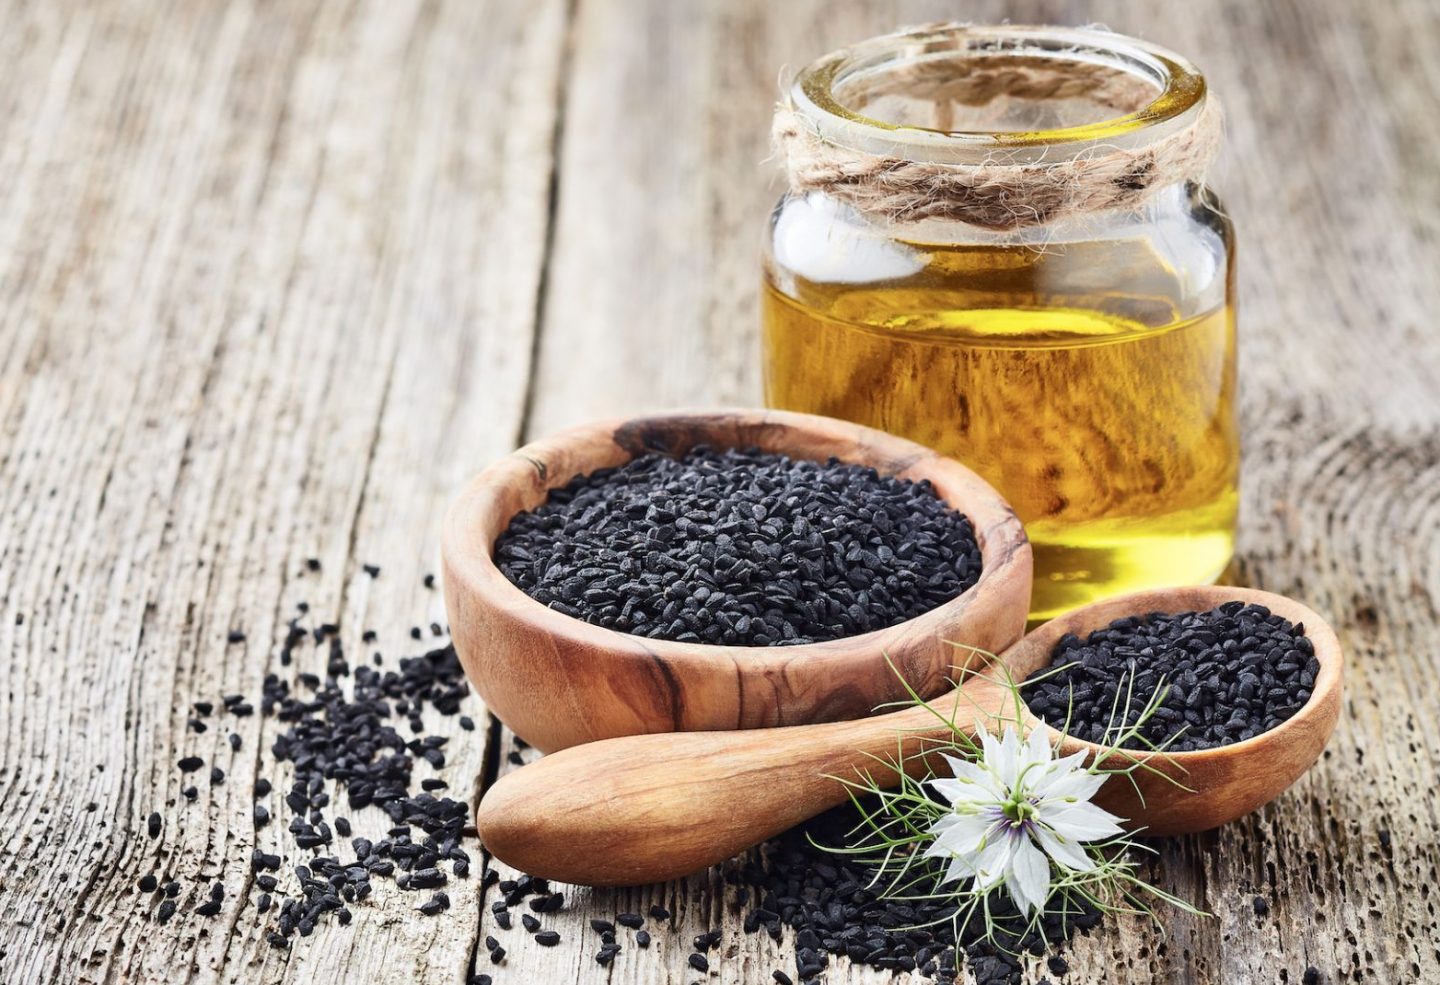 How To Apply Black Seed Oil On Hair